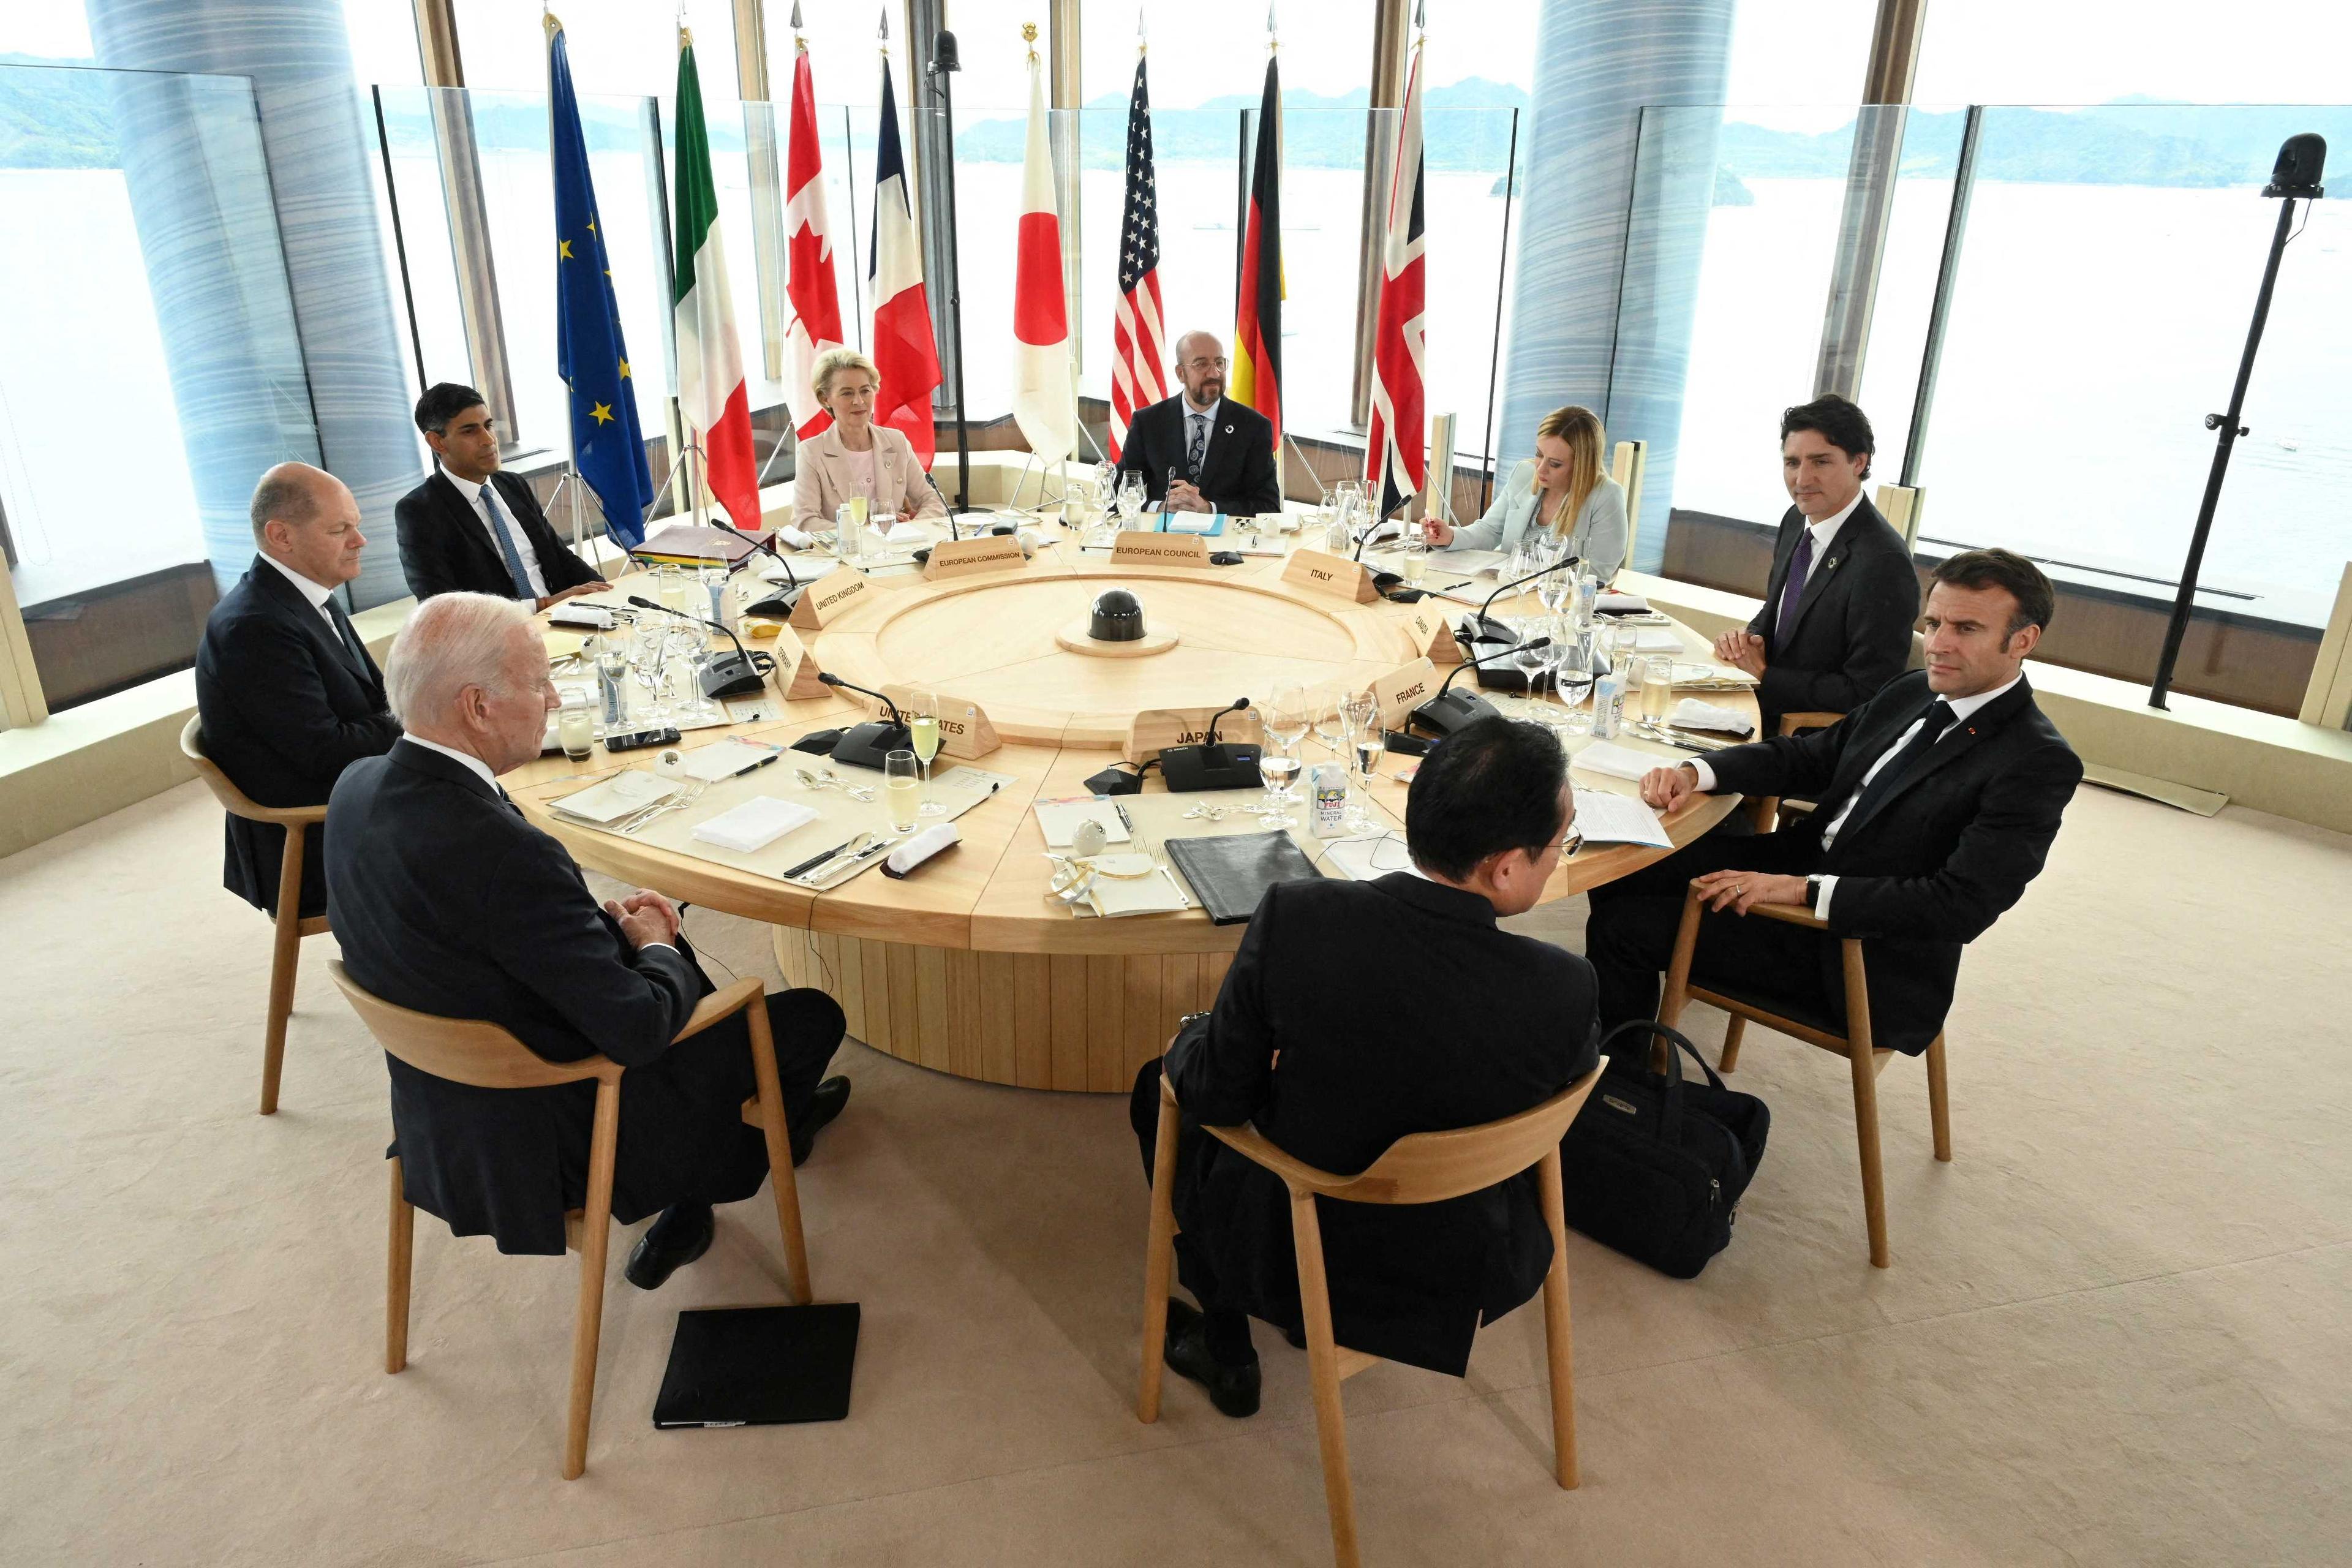 Members of the G7 attend a working lunch meeting at the summit in Hiroshima, western Japan May 19, in this handout photo released by Ministry of Foreign Affairs of Japan. Photo: Reuters